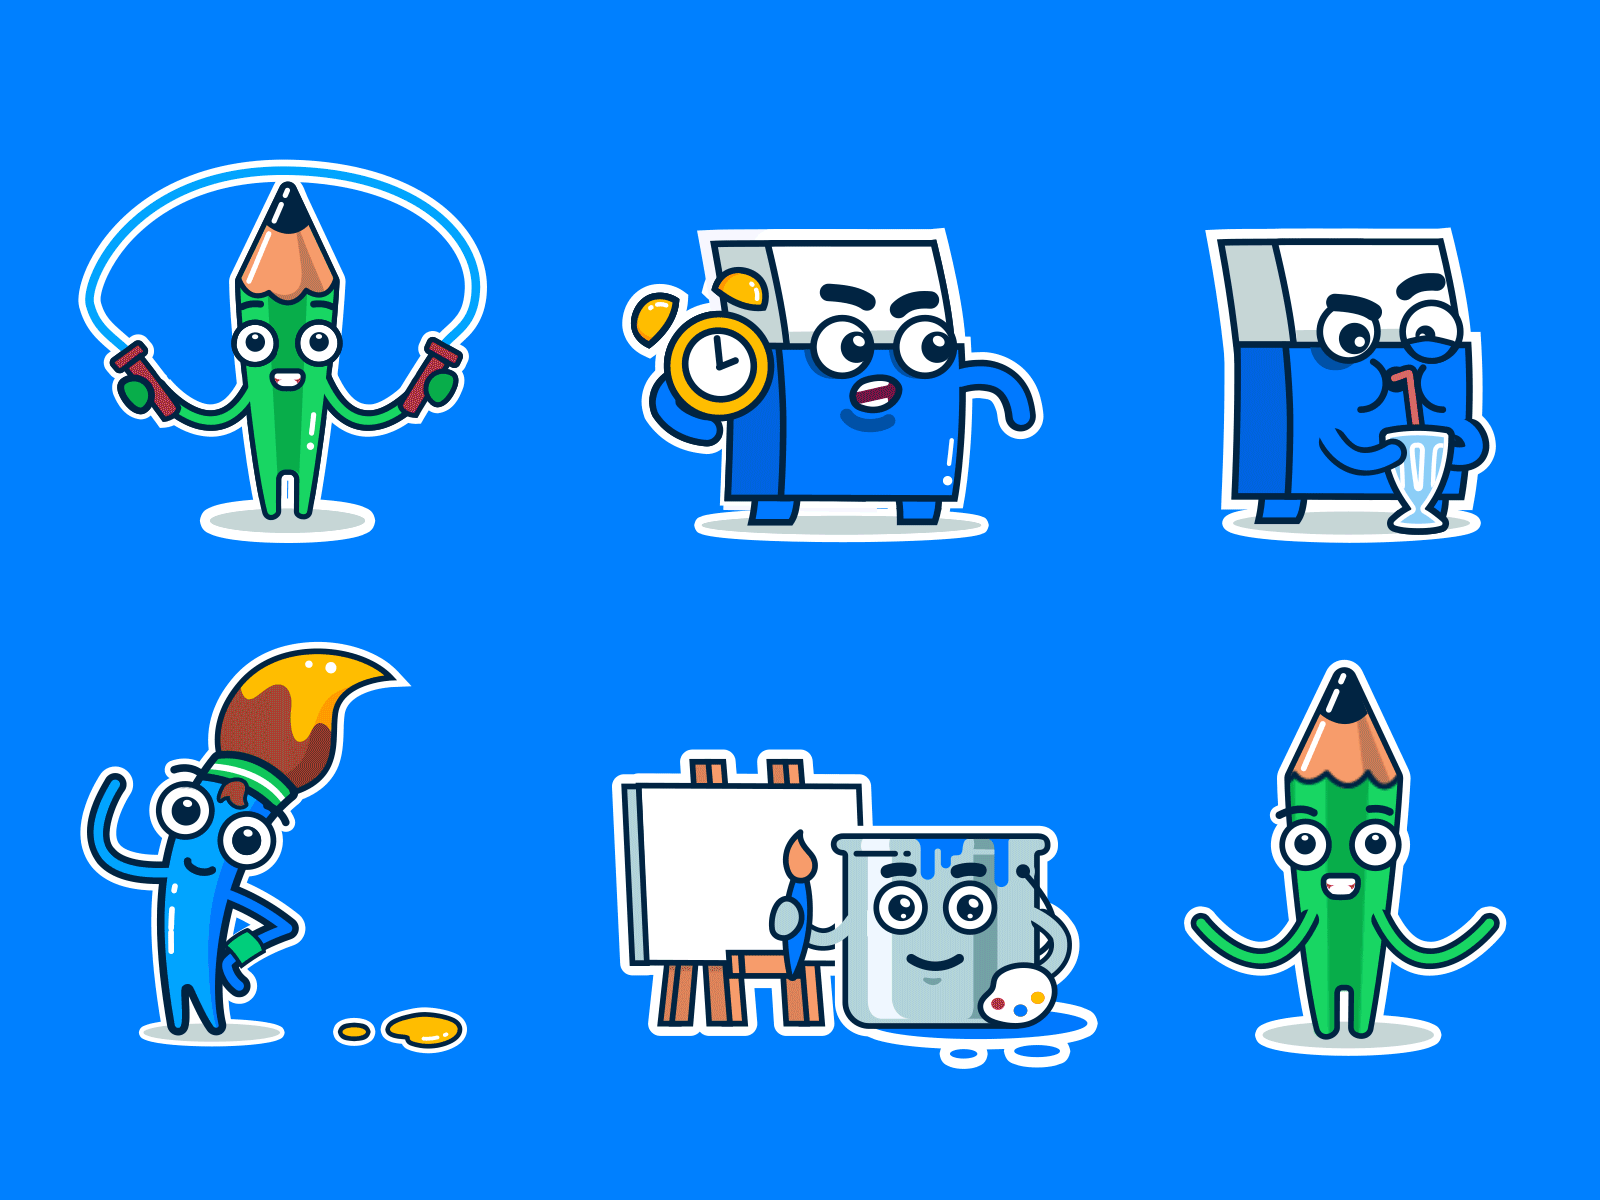 Discord Avatar Animation by André Castro on Dribbble